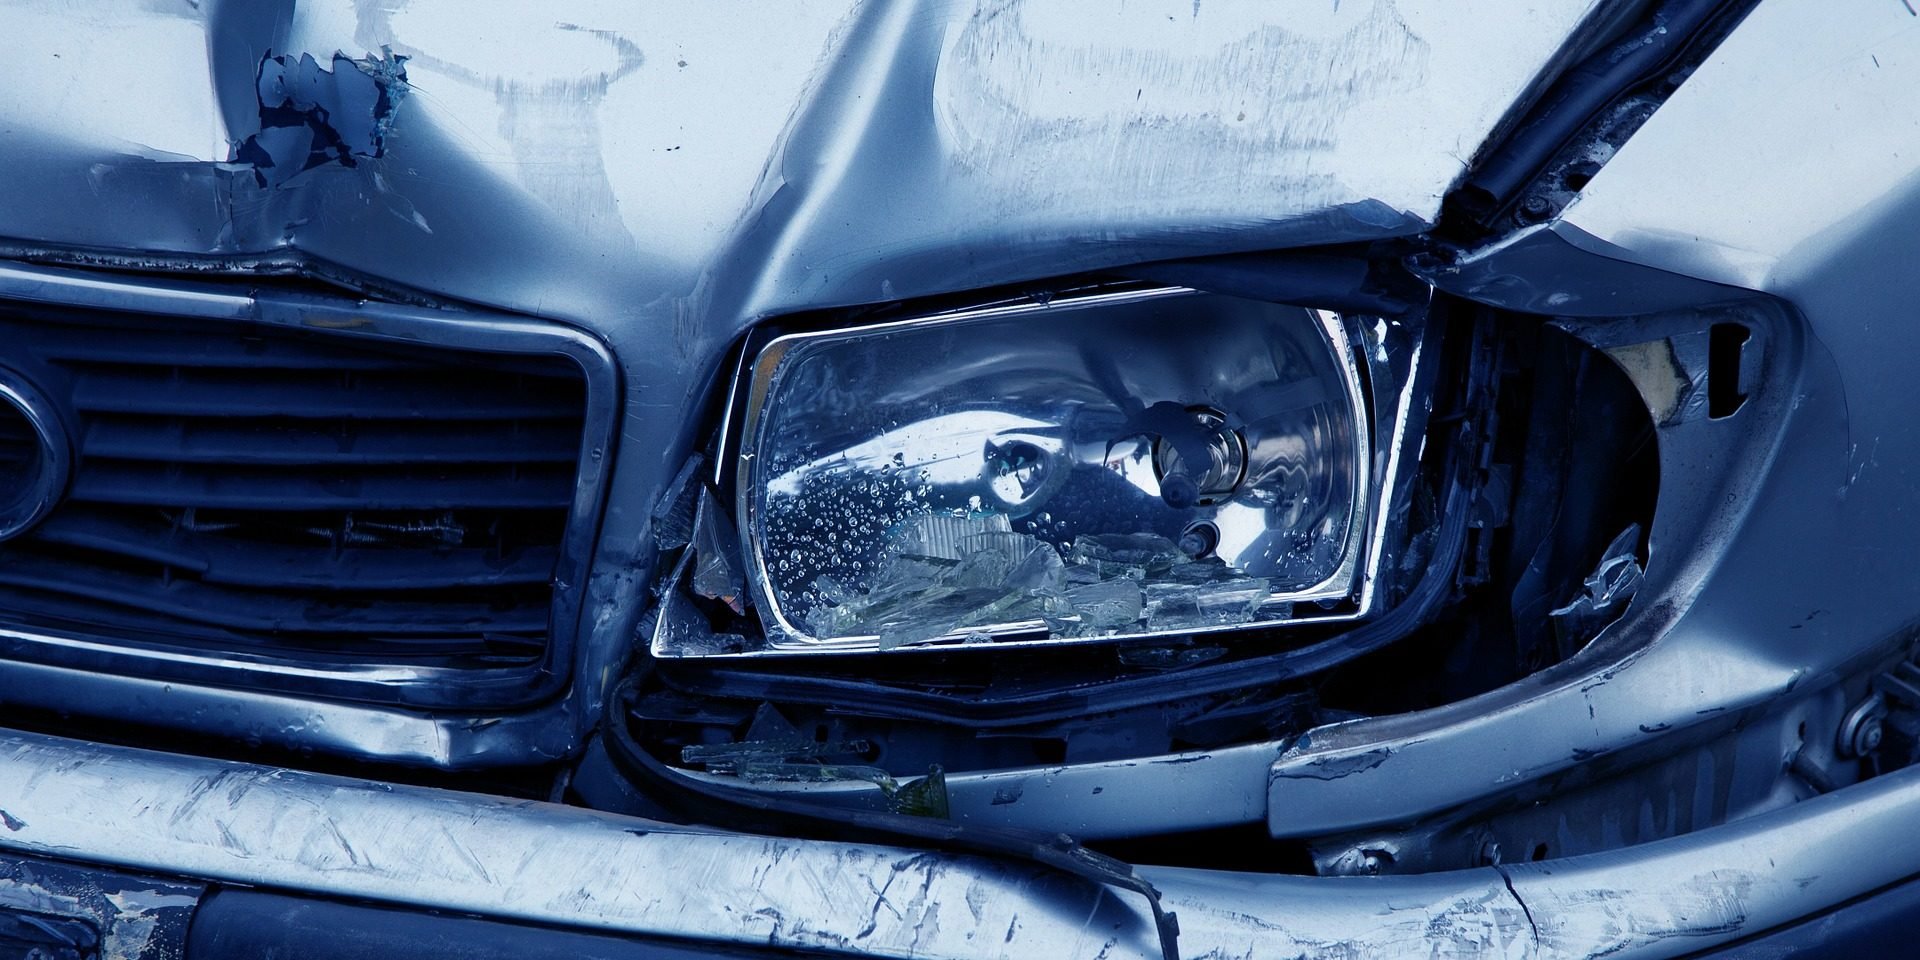 Do Lax Driver’s Ed Requirements Contribute to South Carolina High Car Accident Rate? | SC Injury Attorneys | Steinberg Law Firm